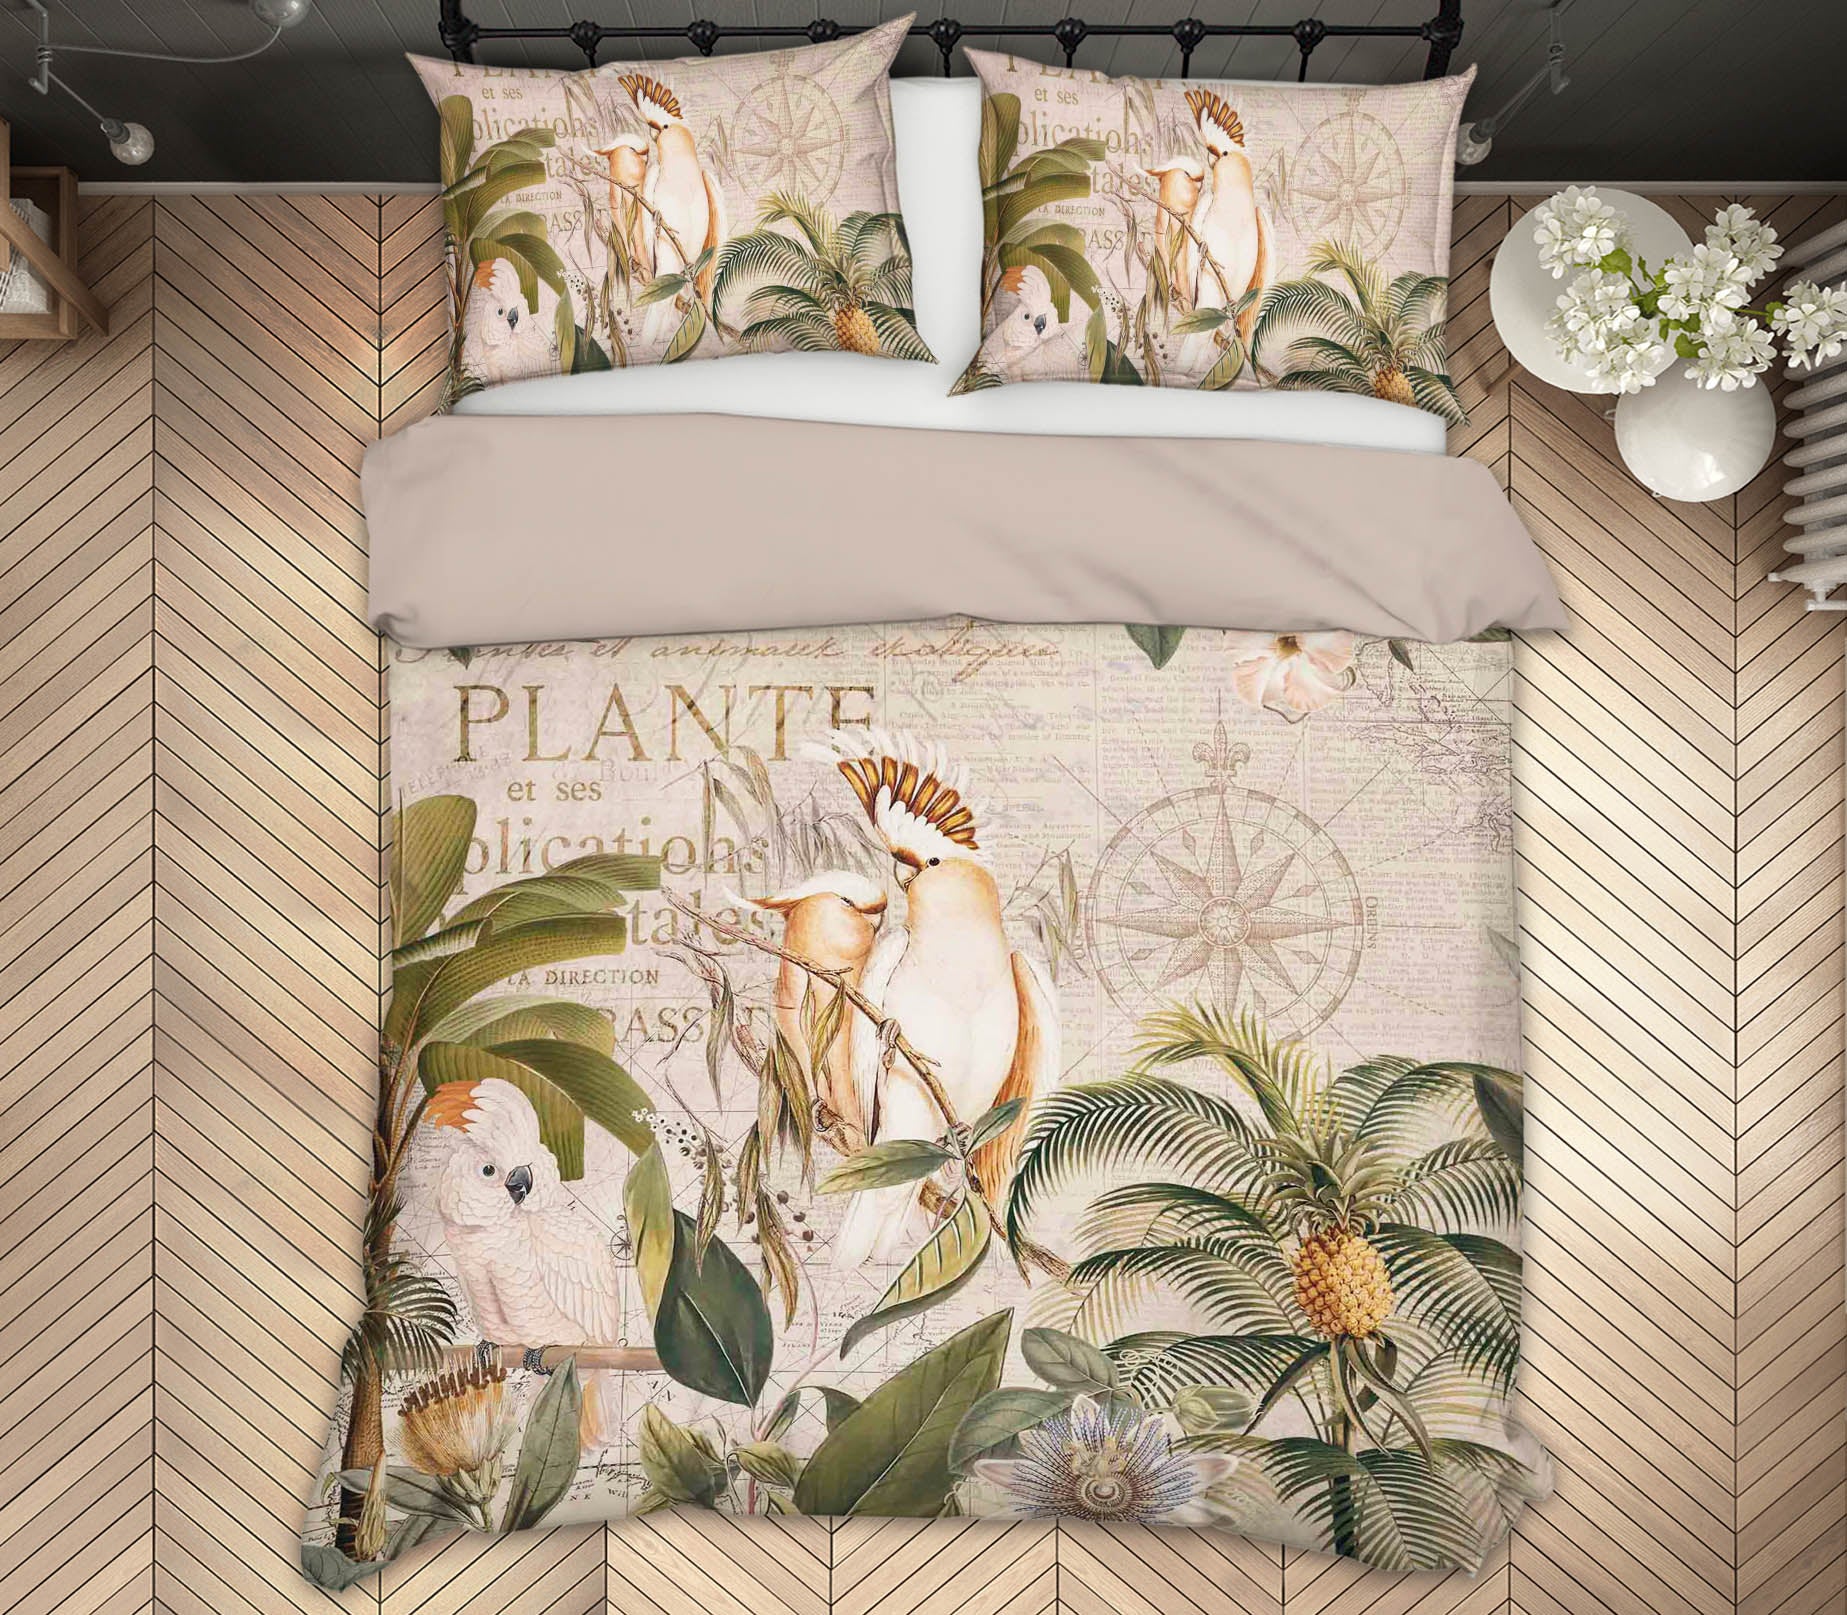 3D Branch Parrot 2143 Andrea haase Bedding Bed Pillowcases Quilt